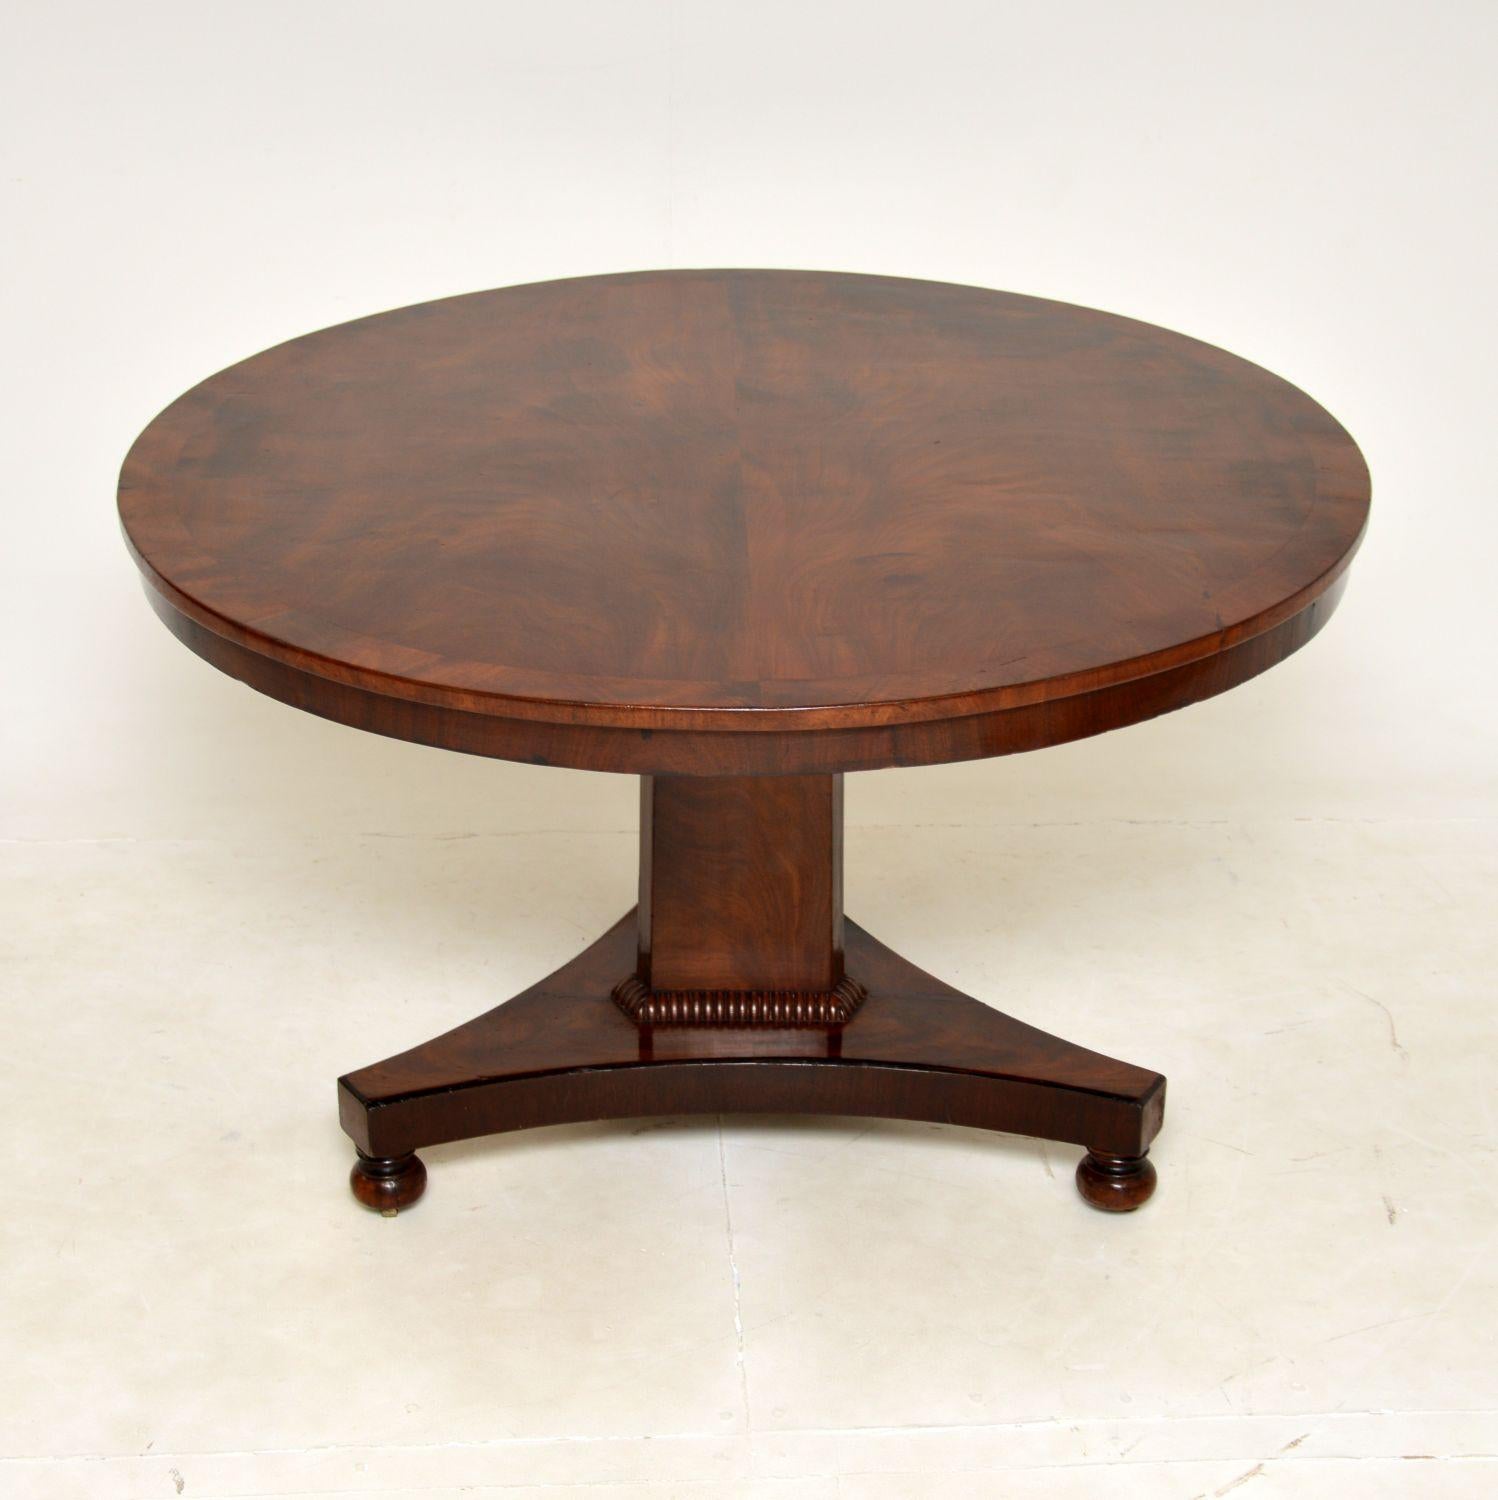 An excellent original antique William IV tilt top dining / centre table. This was made in England, it dates from around the 1830-1840s period.

It is of superb quality and is a very useful size. It could be used as a dining / kitchen table or even